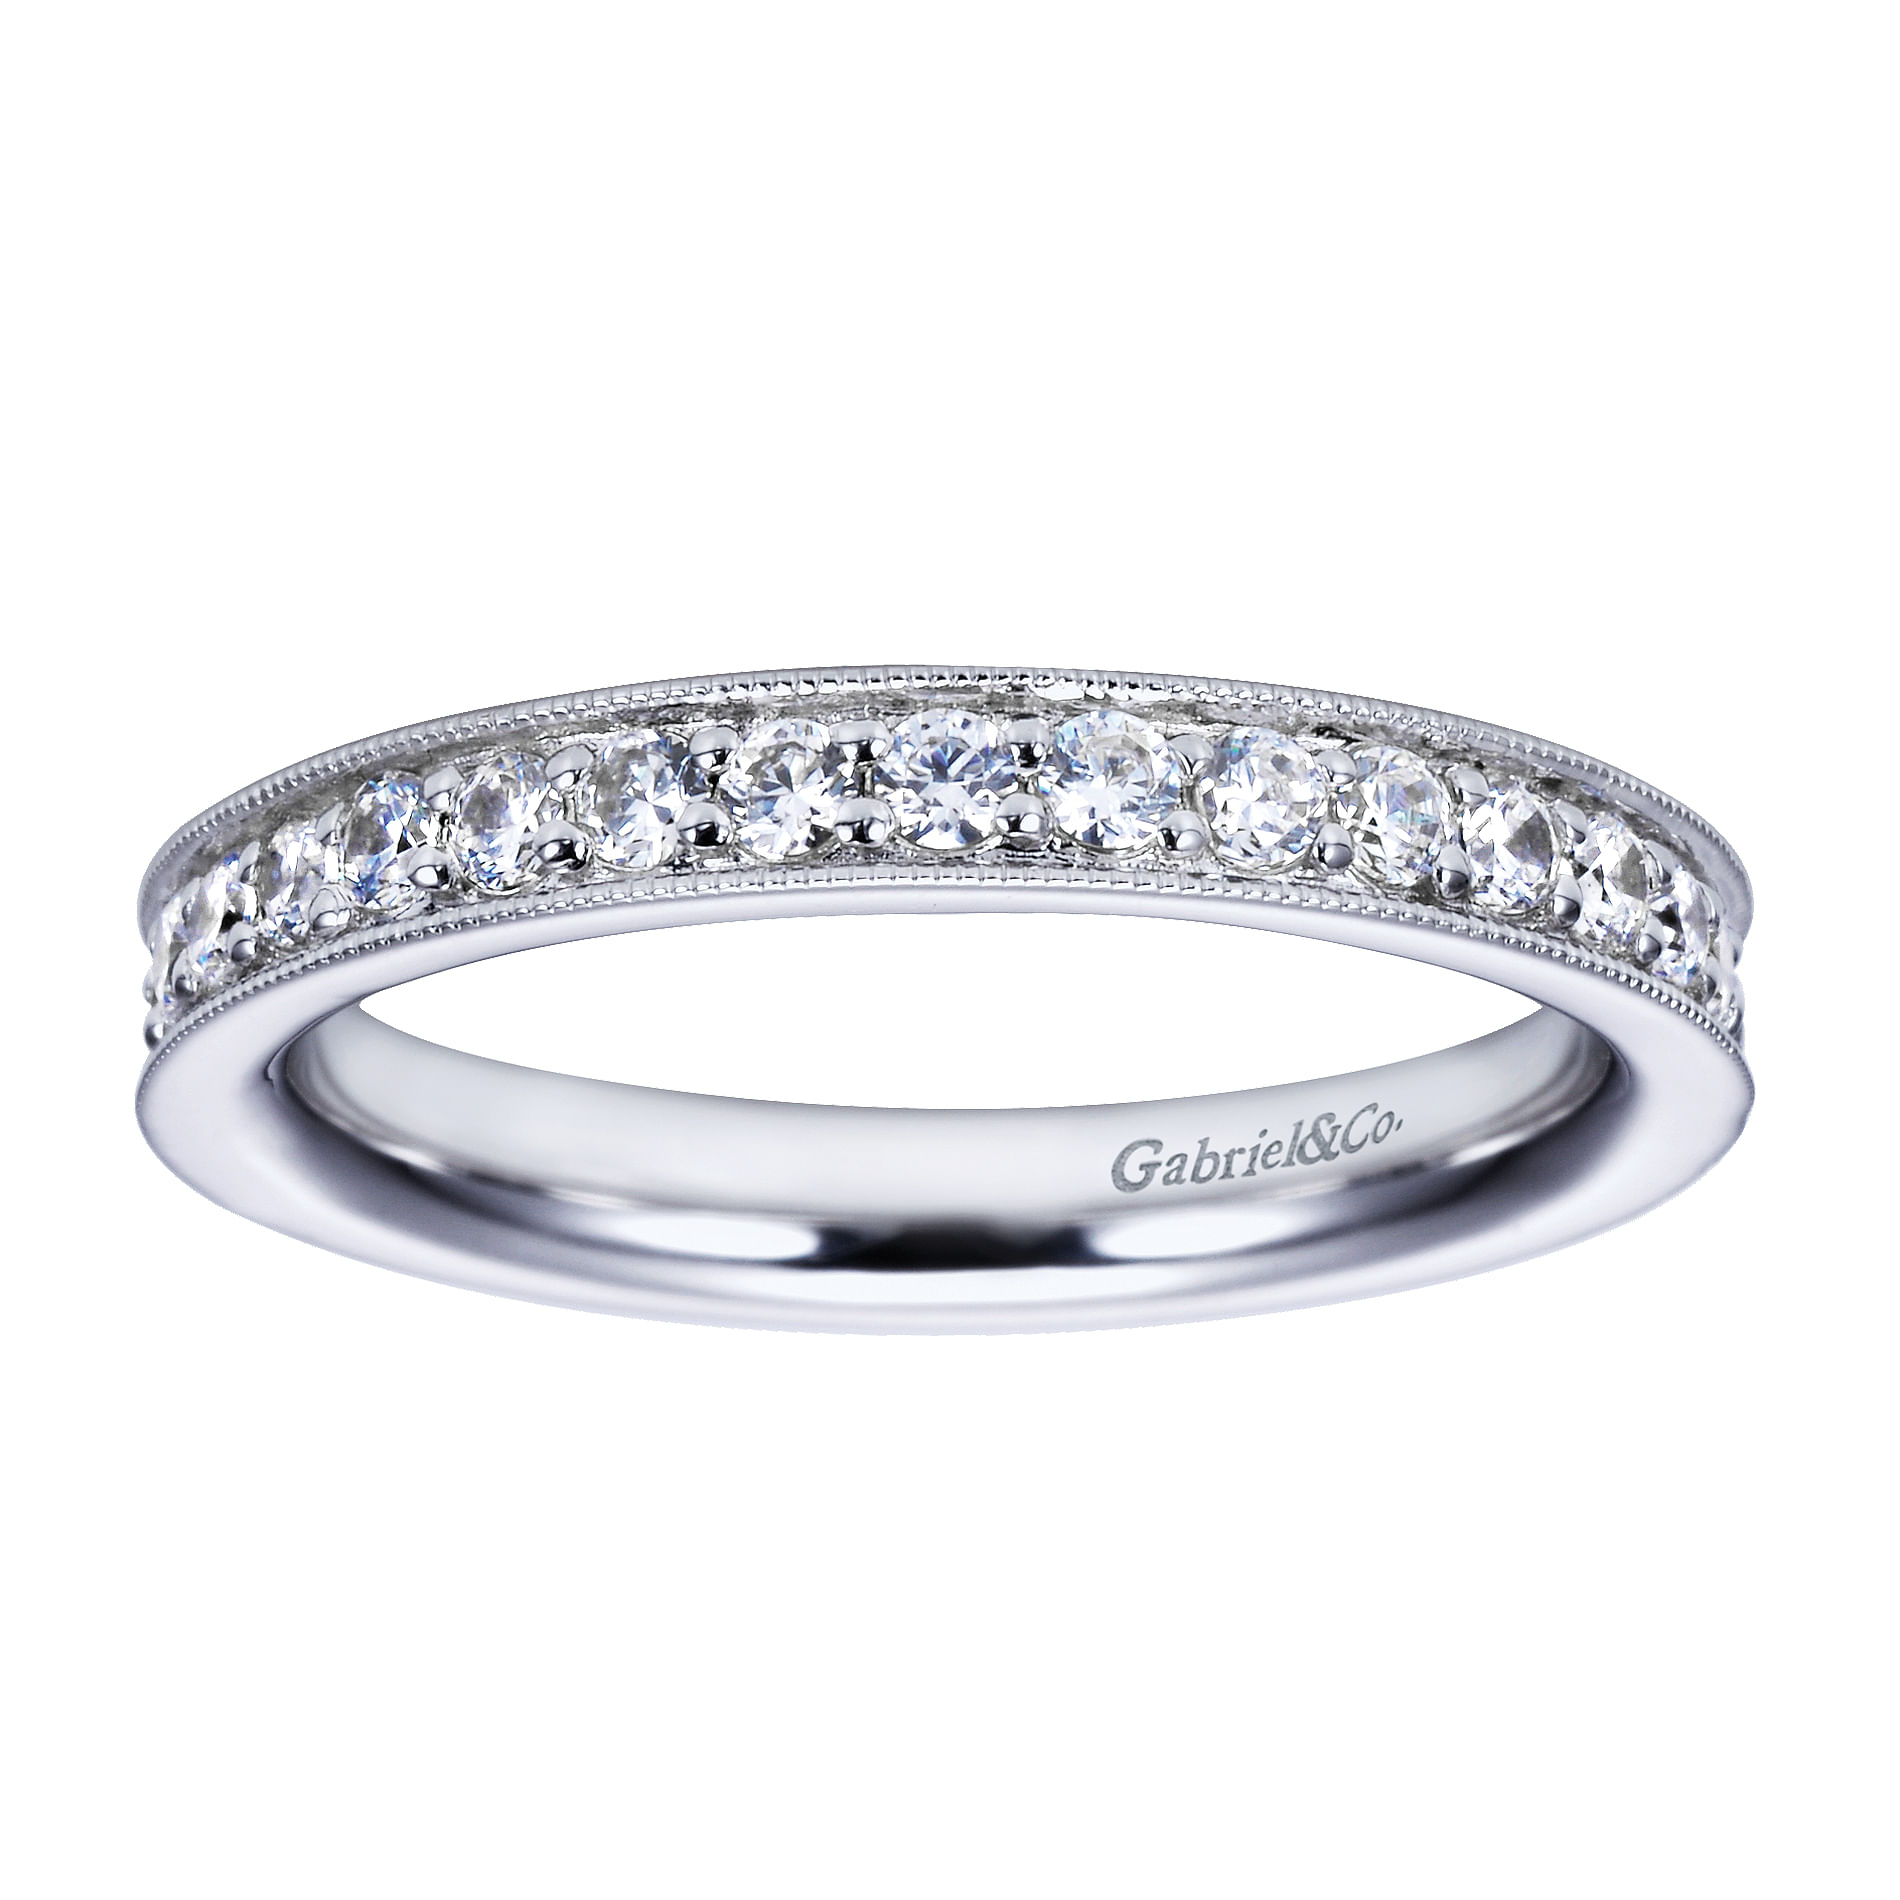 14K White Gold Channel Prong Diamond Eternity Band with Millgrain